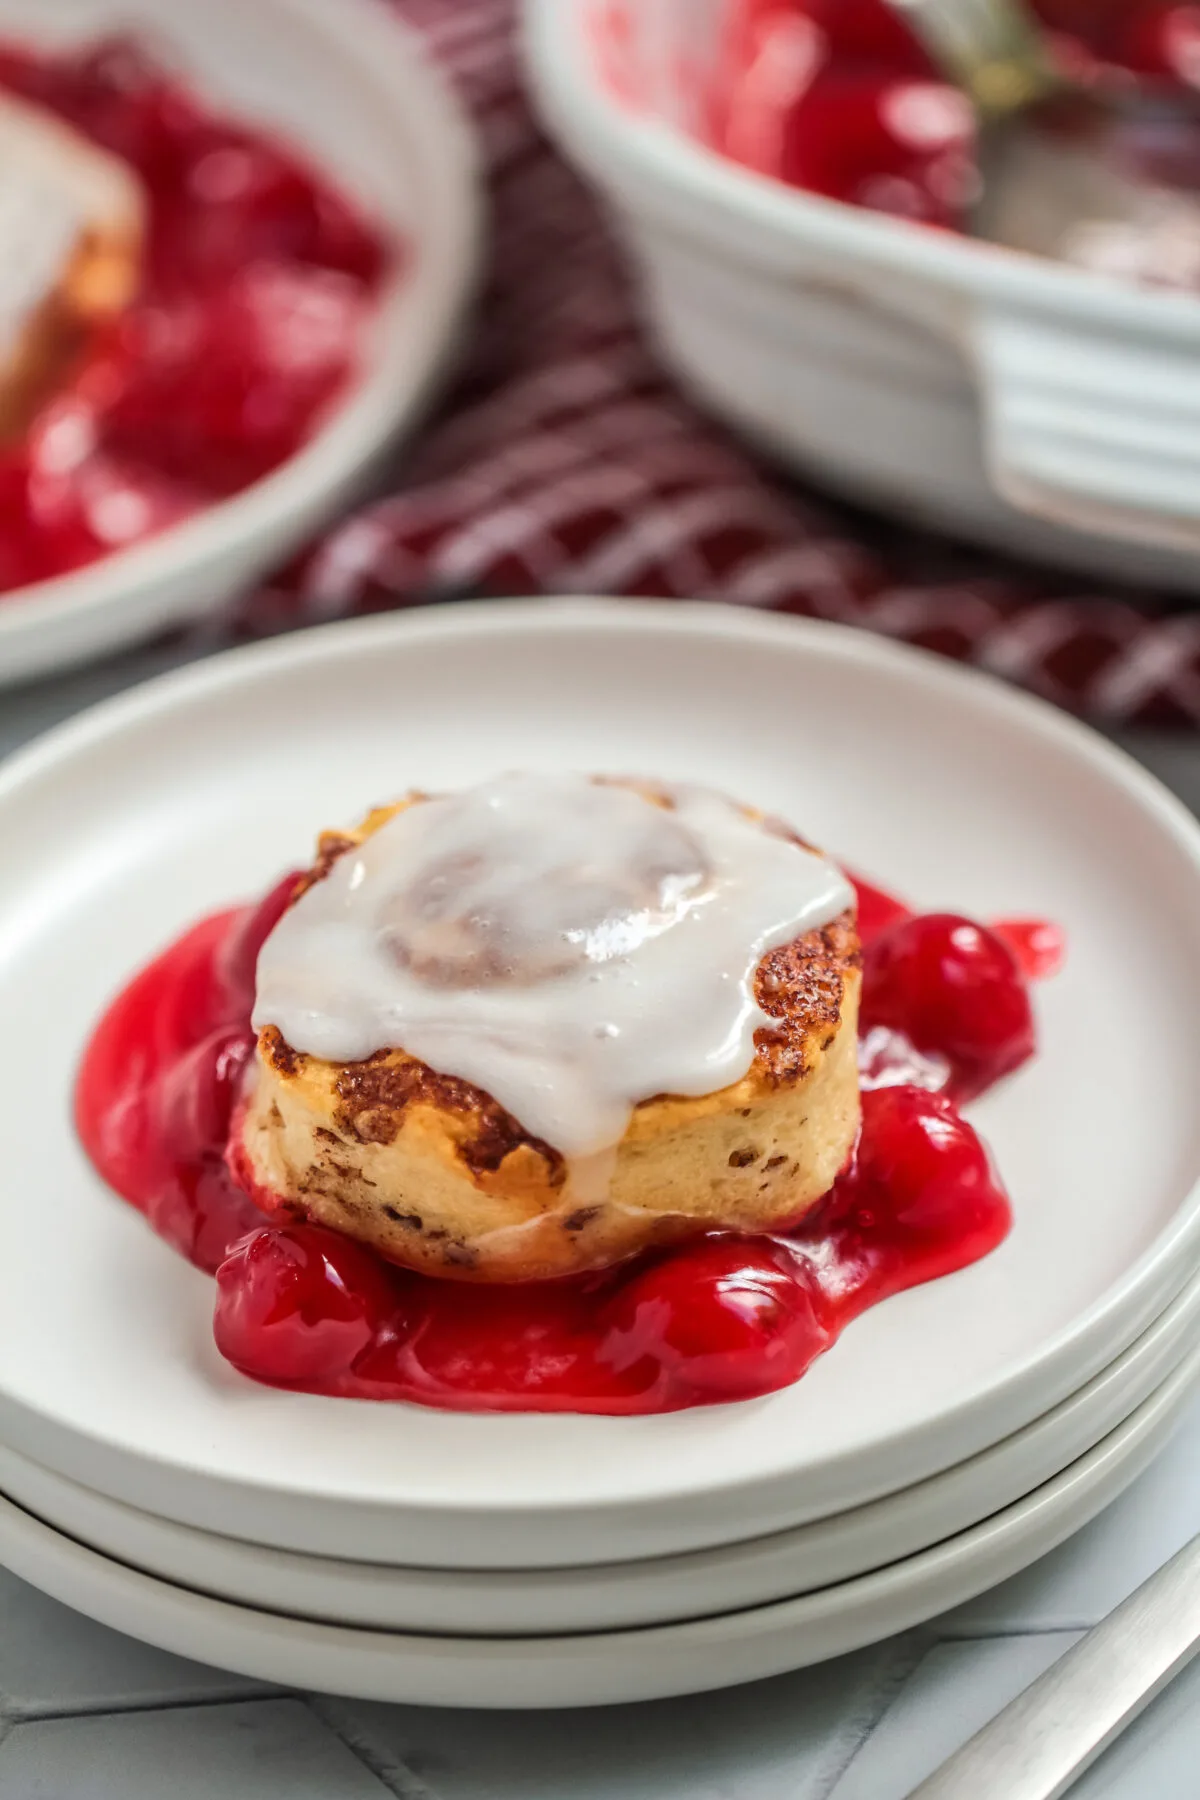 This Cinnamon Roll Cherry Cobbler Recipe uses just two ingredients. Warm and gooey, this easy dessert is perfect for any occasion.